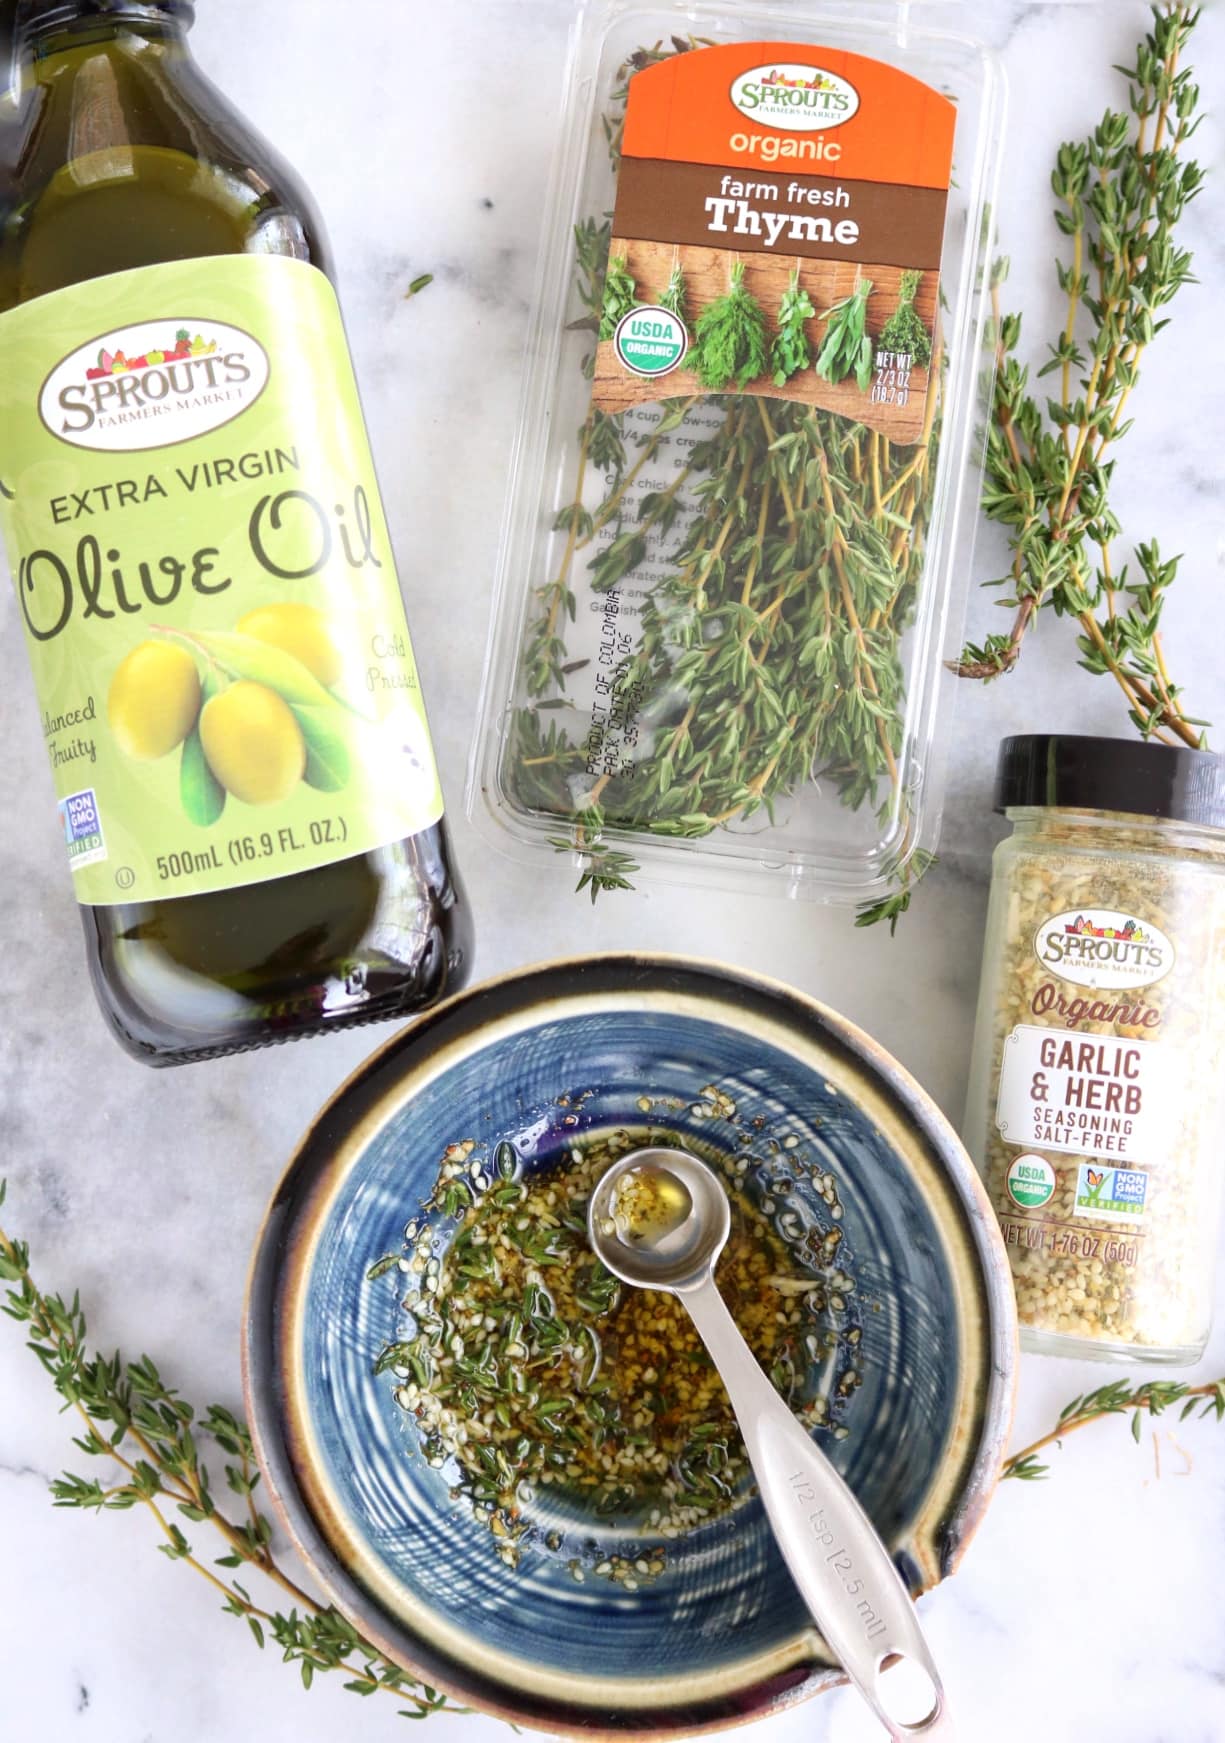 Olive oil, thyme, and garlic & herb seasoning mixture for tenderloin and vegetables